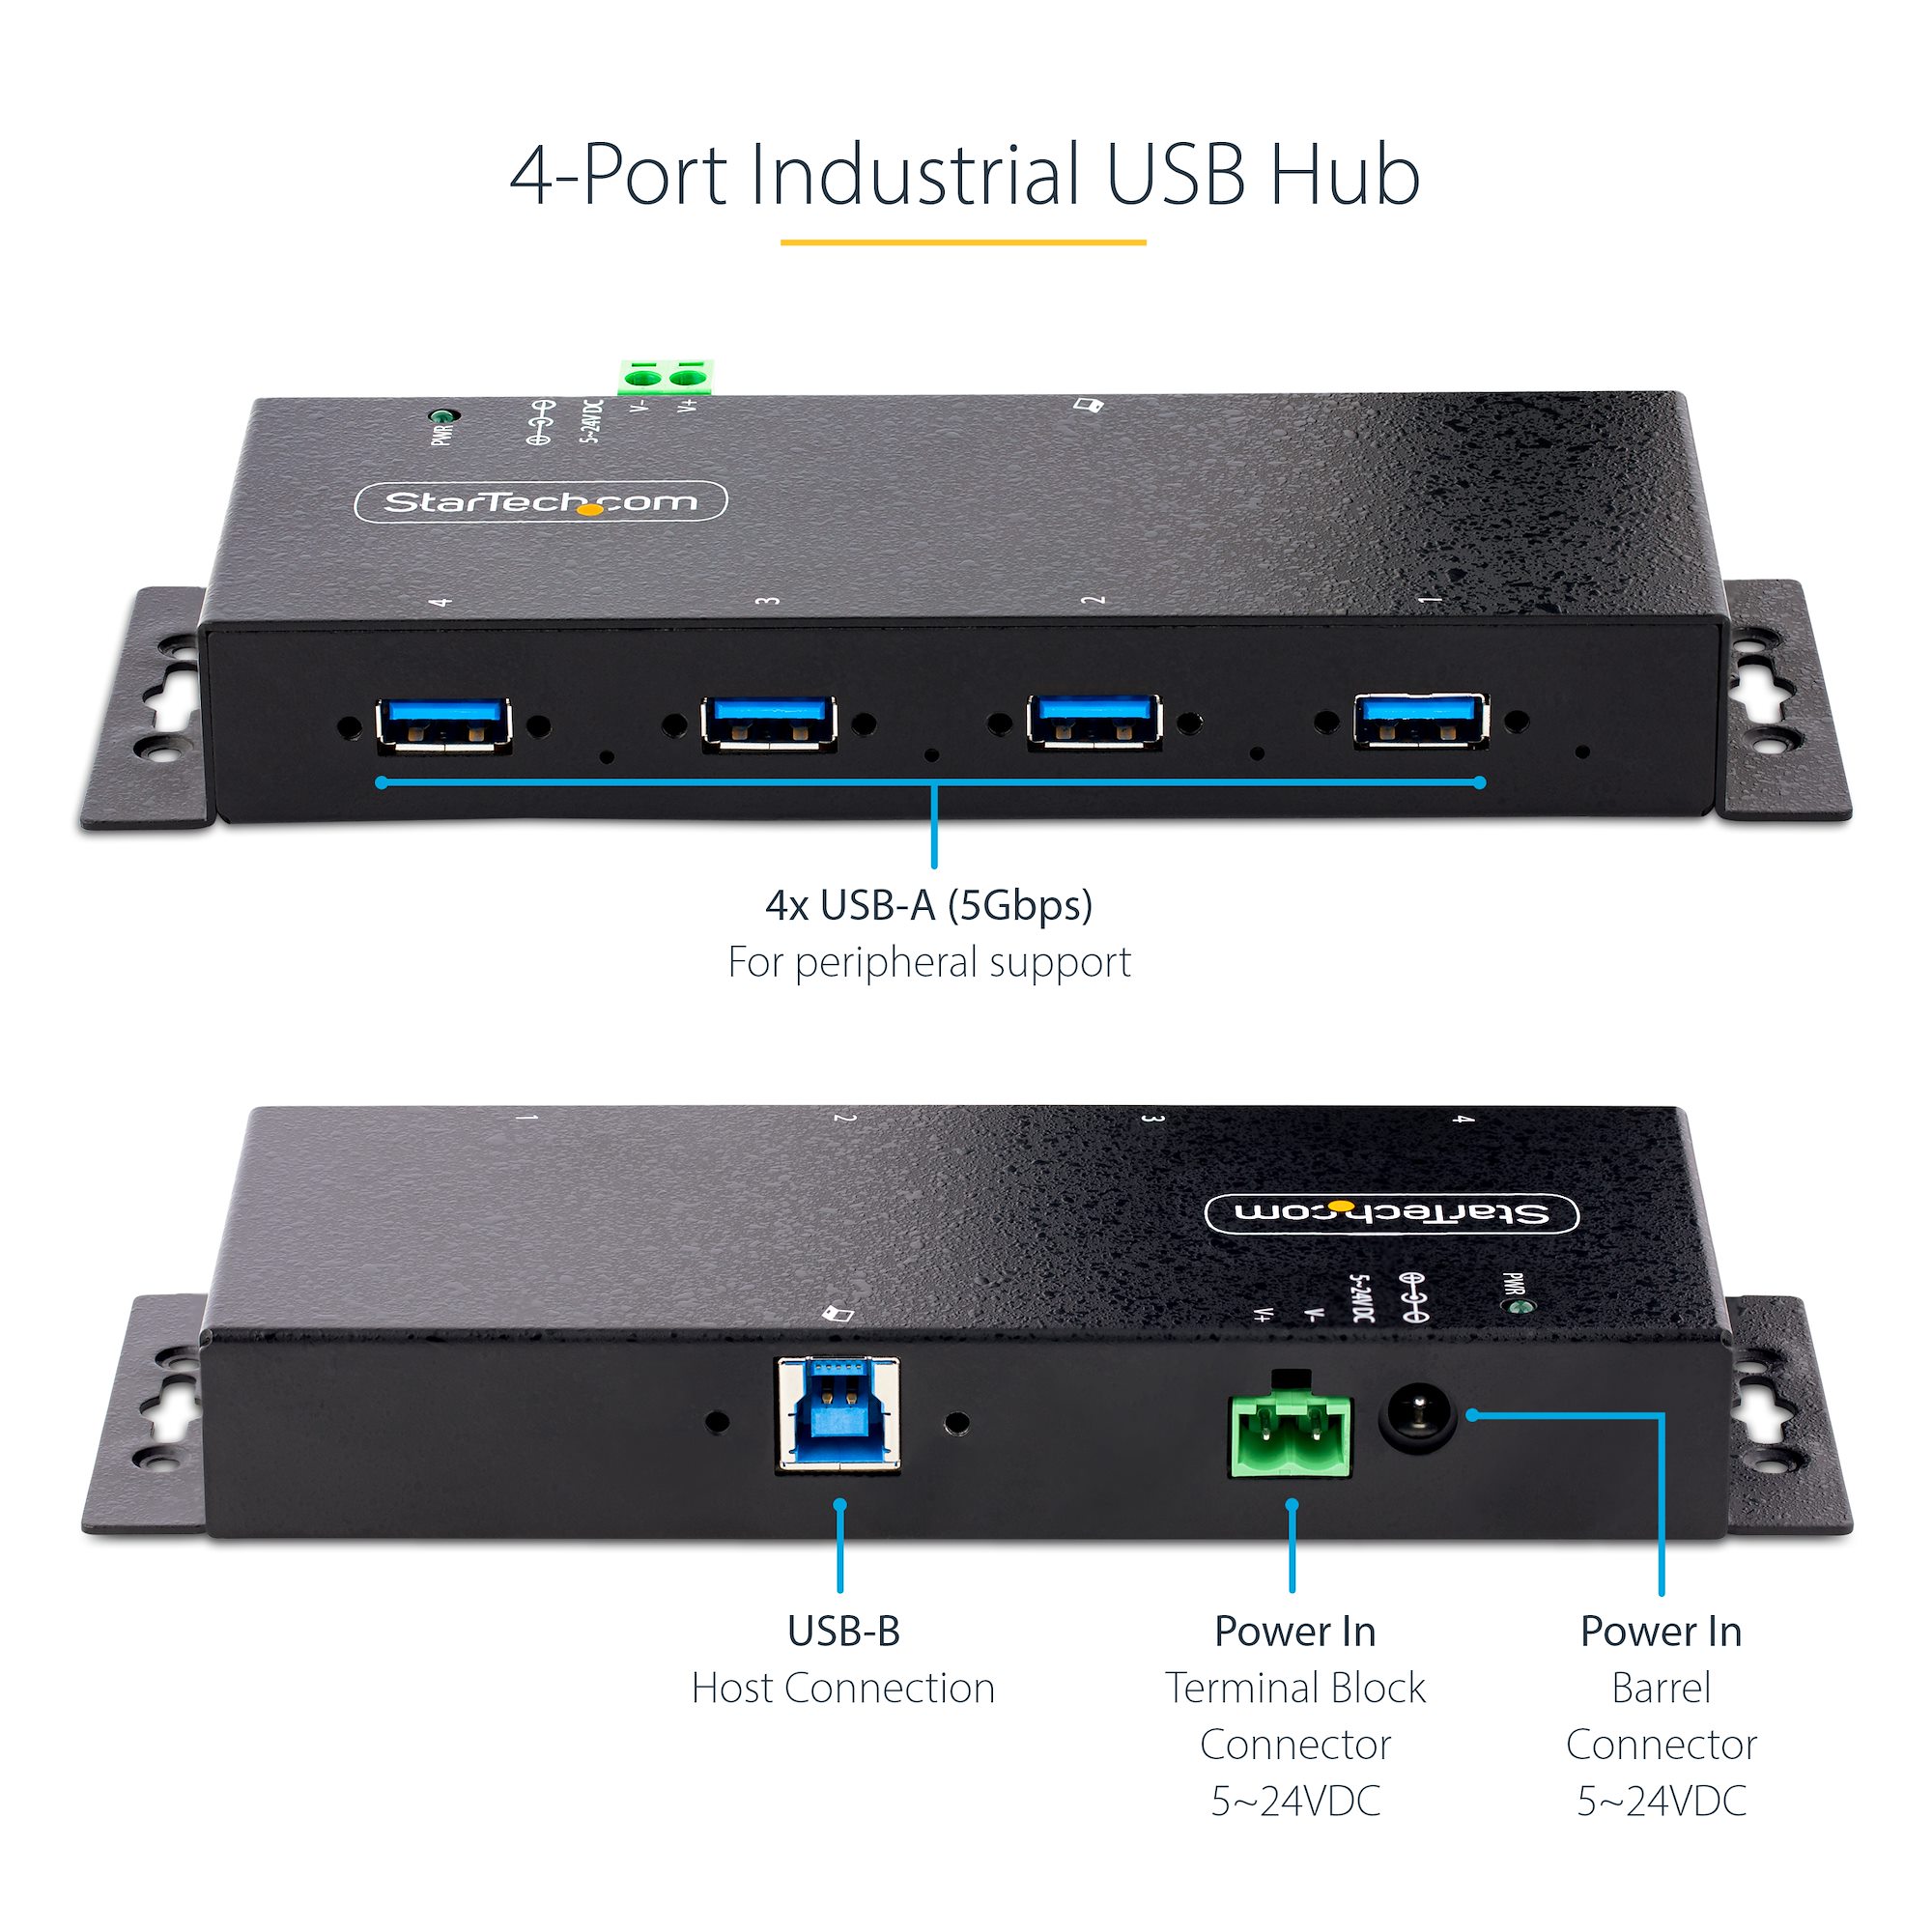 To connect multiple USB devices to a single USB port, what can be